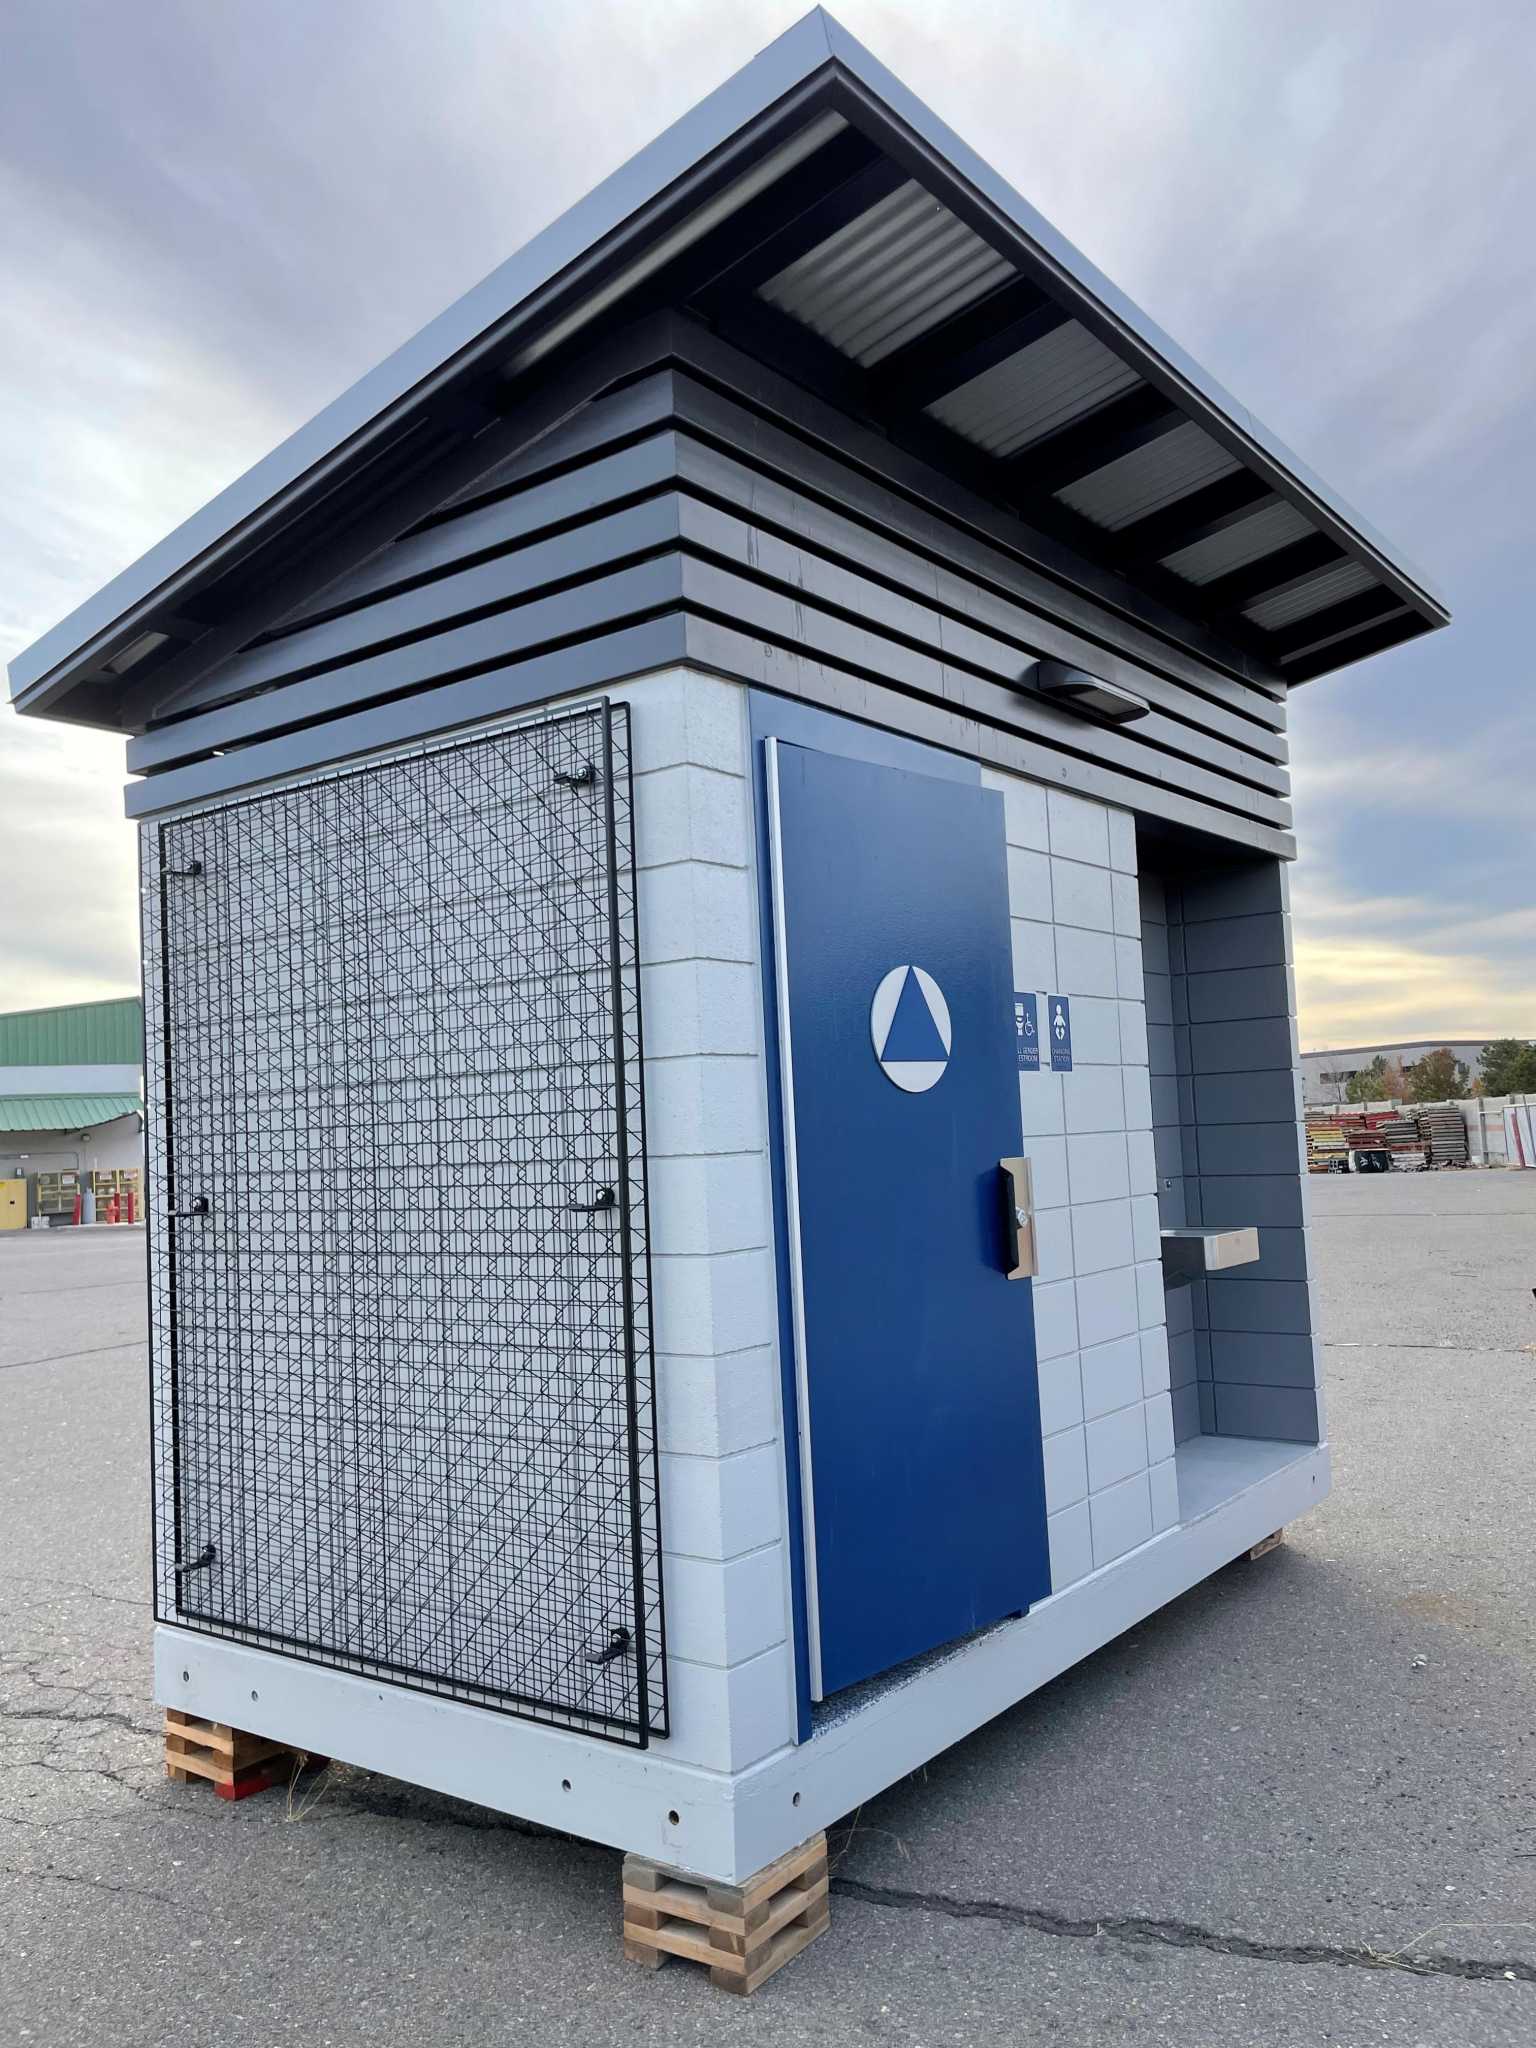 S.F. Toiletgate: City is being gifted a free bathroom, but it's still going  to cost $1 million